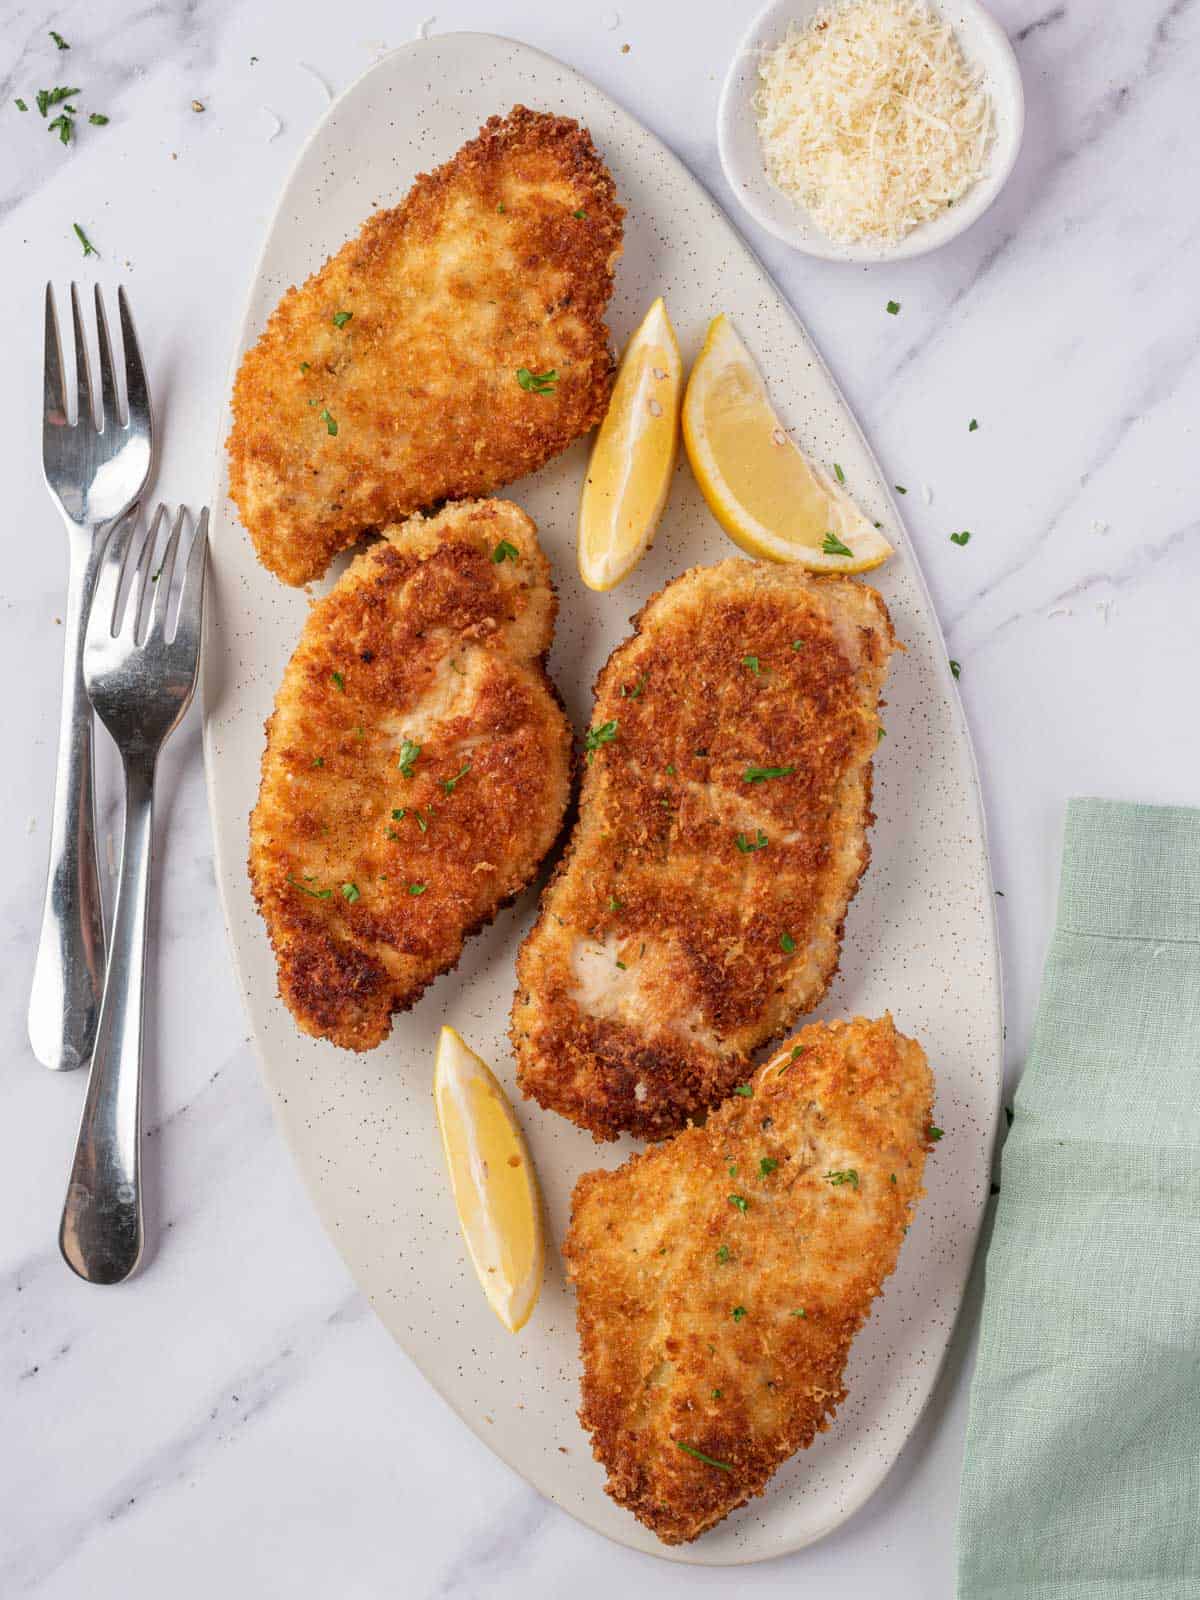 A platter of four parmesan crusted chicken breasts.